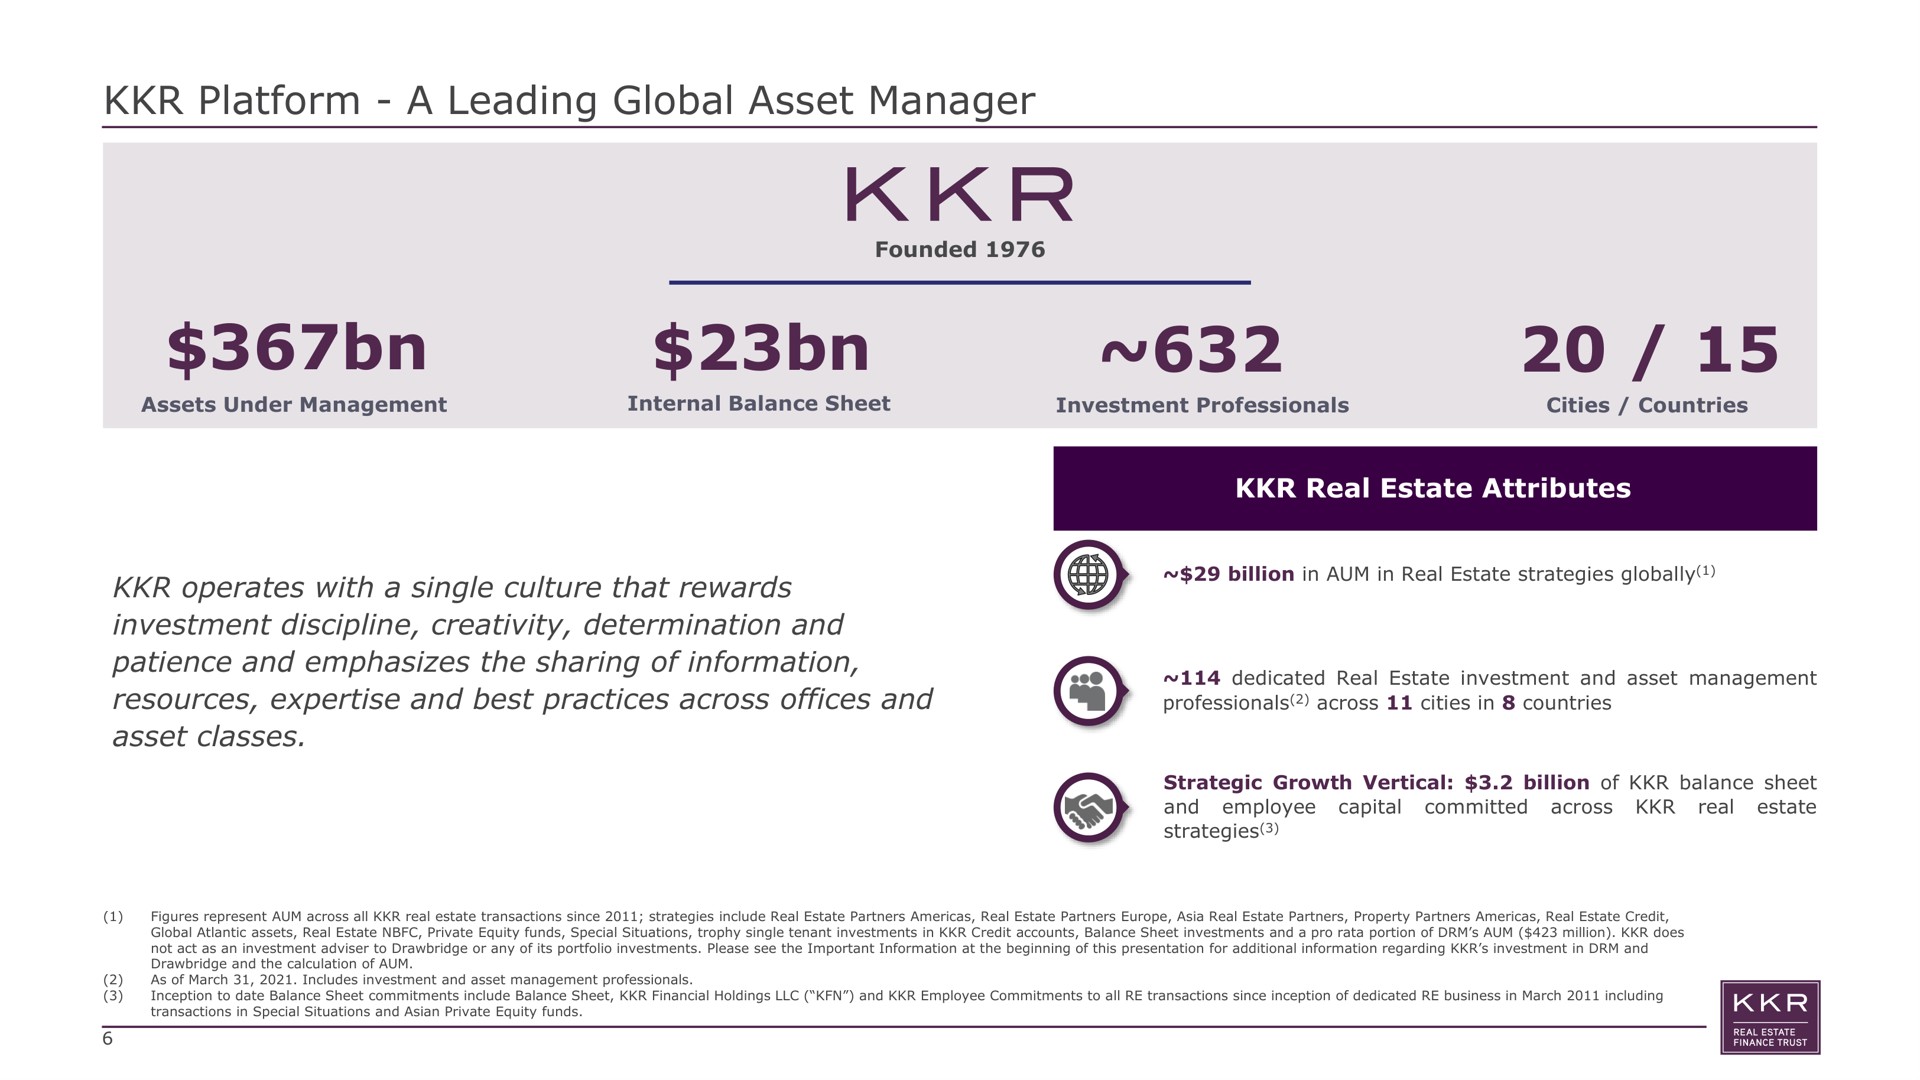 platform a leading global asset manager attributes real estate attributes operates with a single culture that rewards investment discipline creativity determination and patience and emphasizes the sharing of information resources and best practices across offices and asset classes sea ally | KKR Real Estate Finance Trust